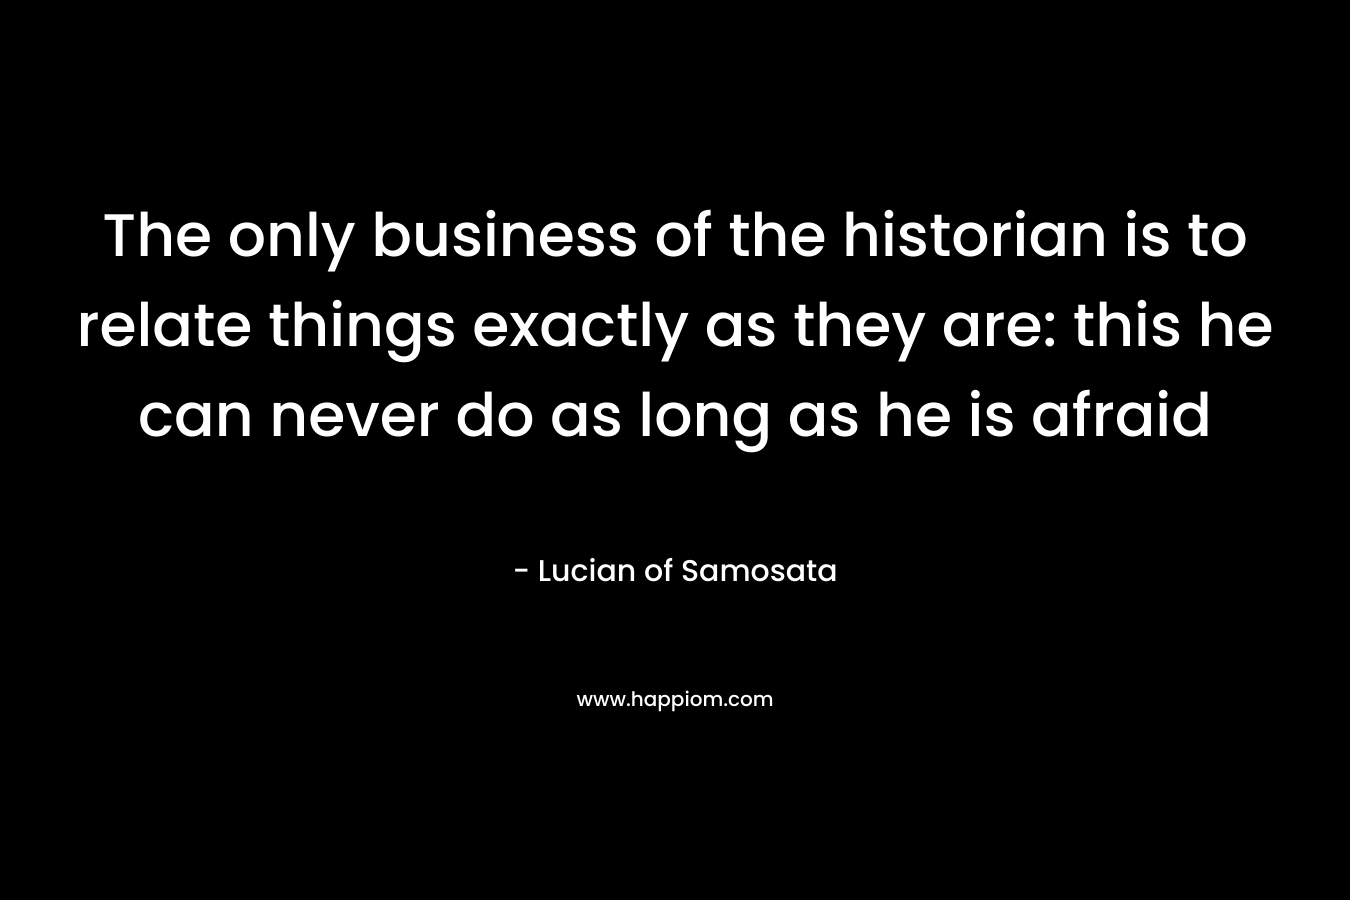 The only business of the historian is to relate things exactly as they are: this he can never do as long as he is afraid